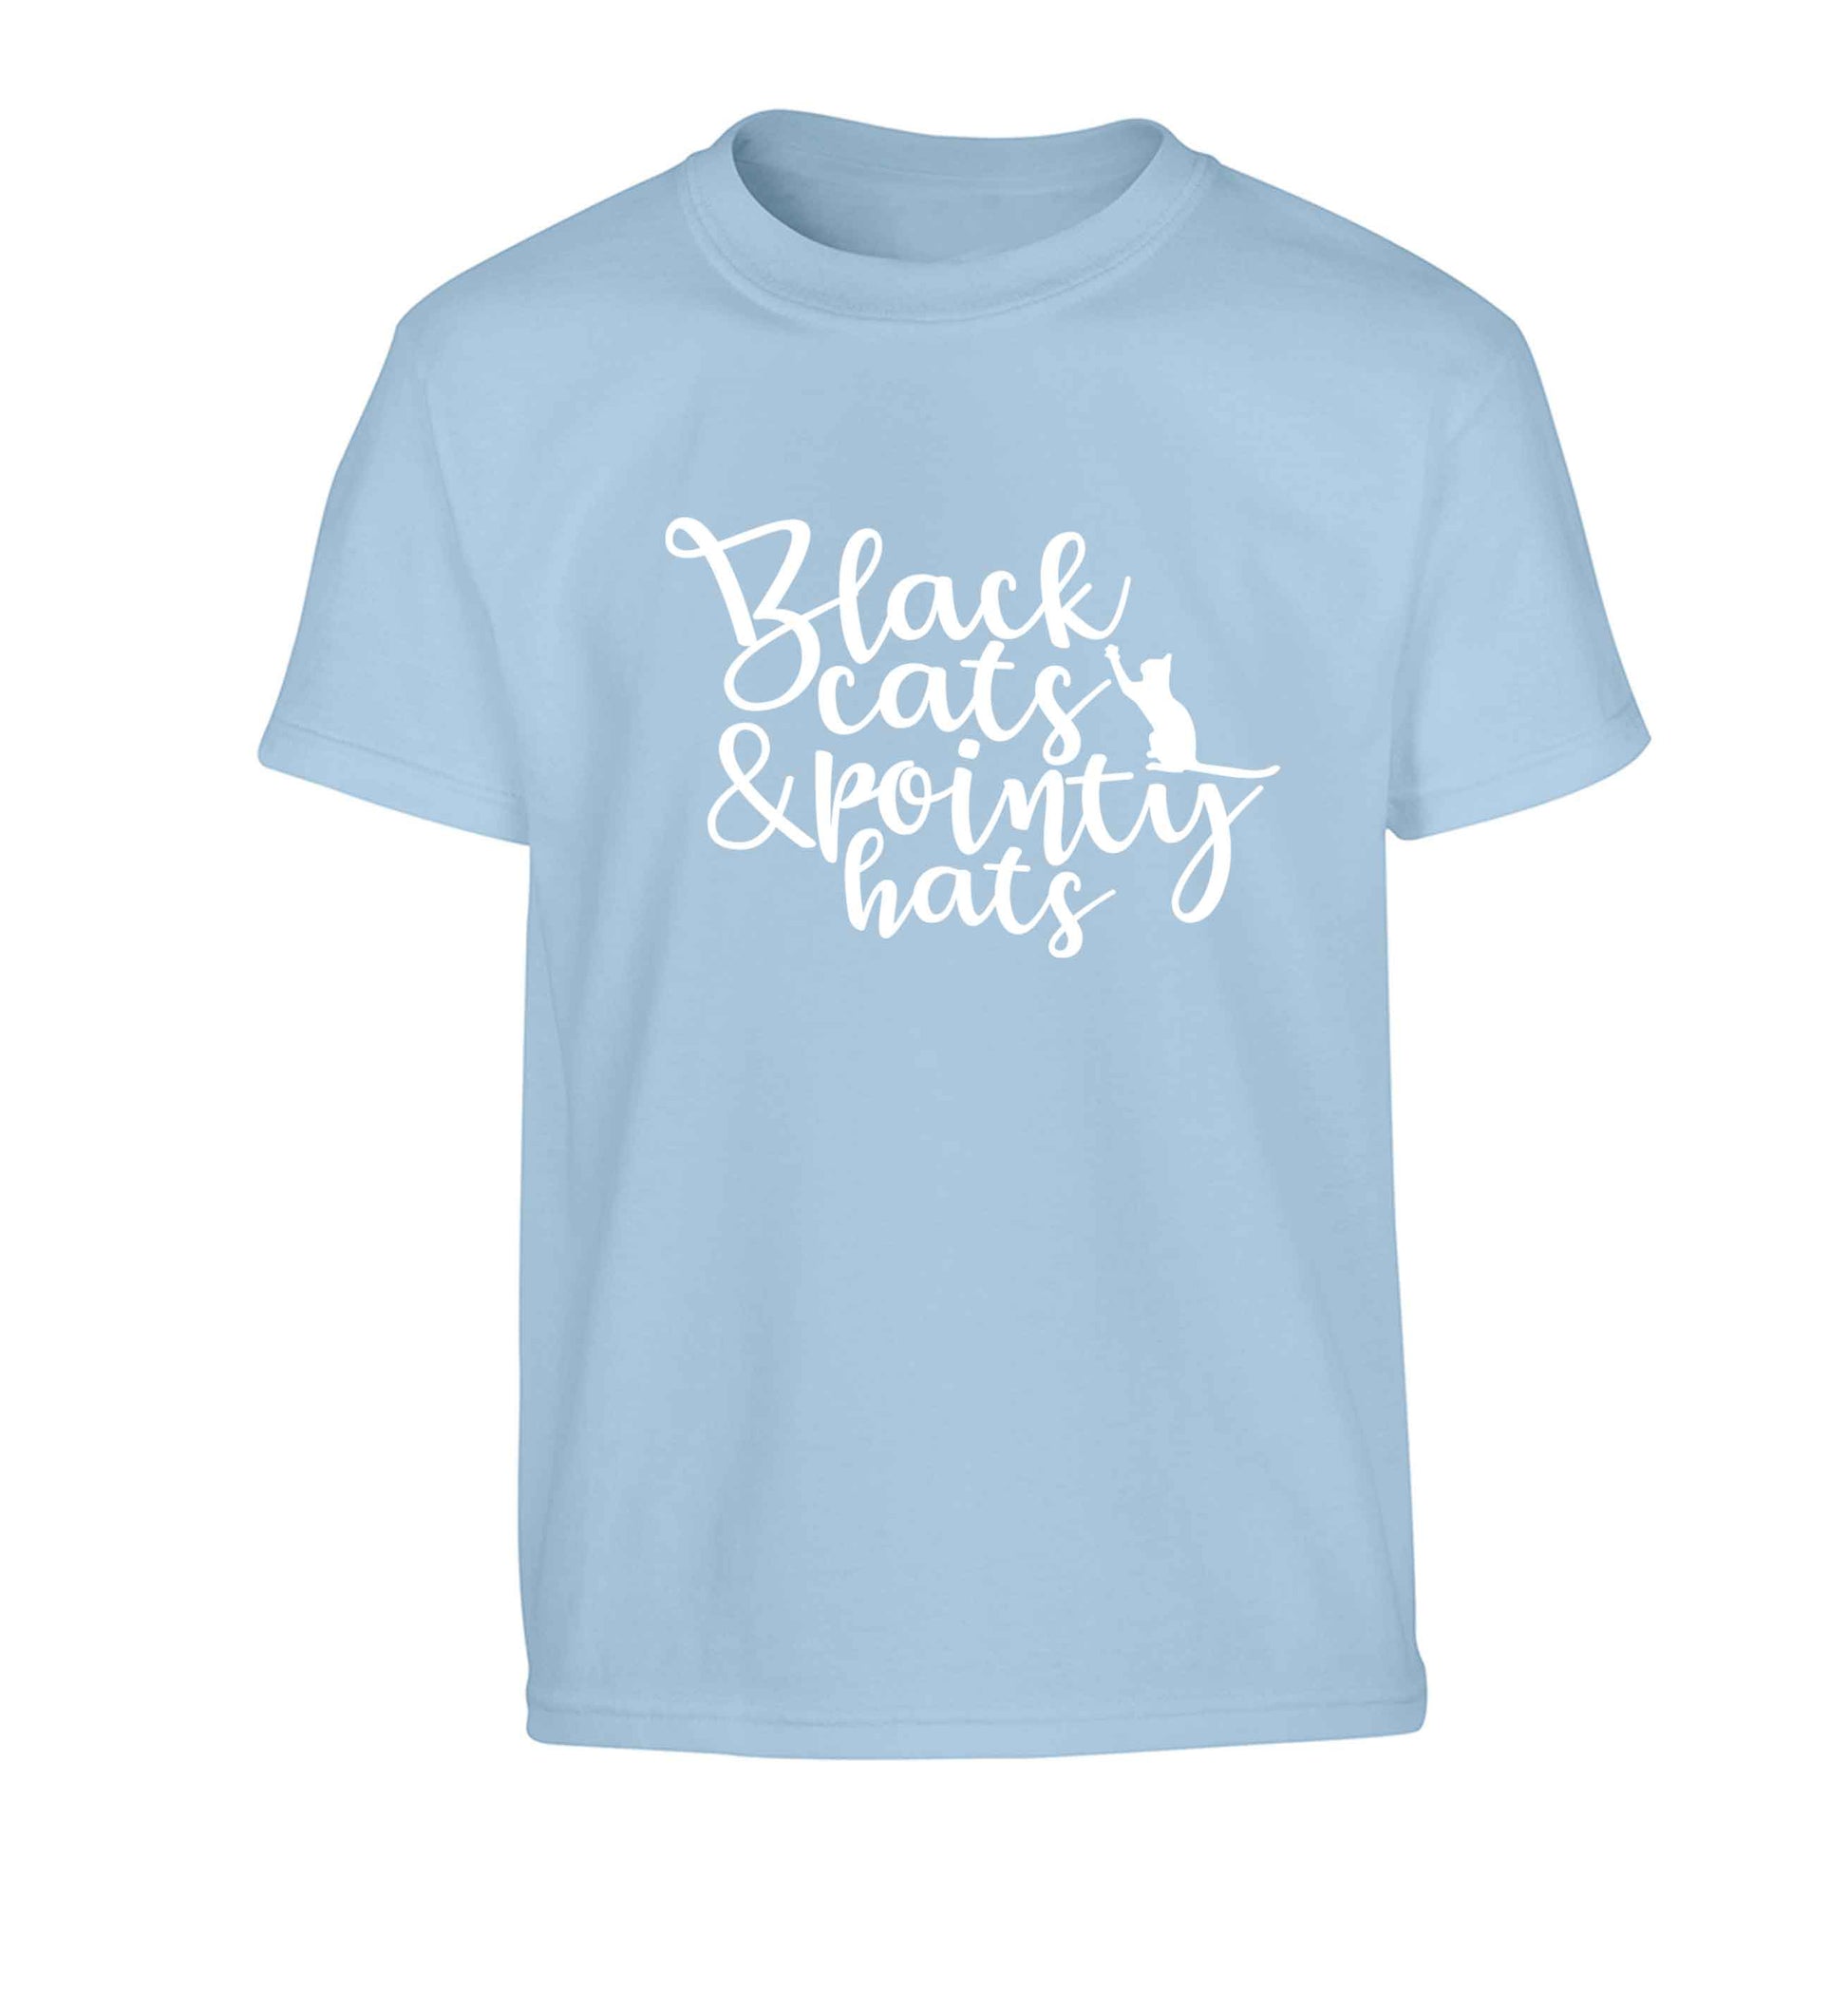 Black cats and pointy hats Children's light blue Tshirt 12-13 Years